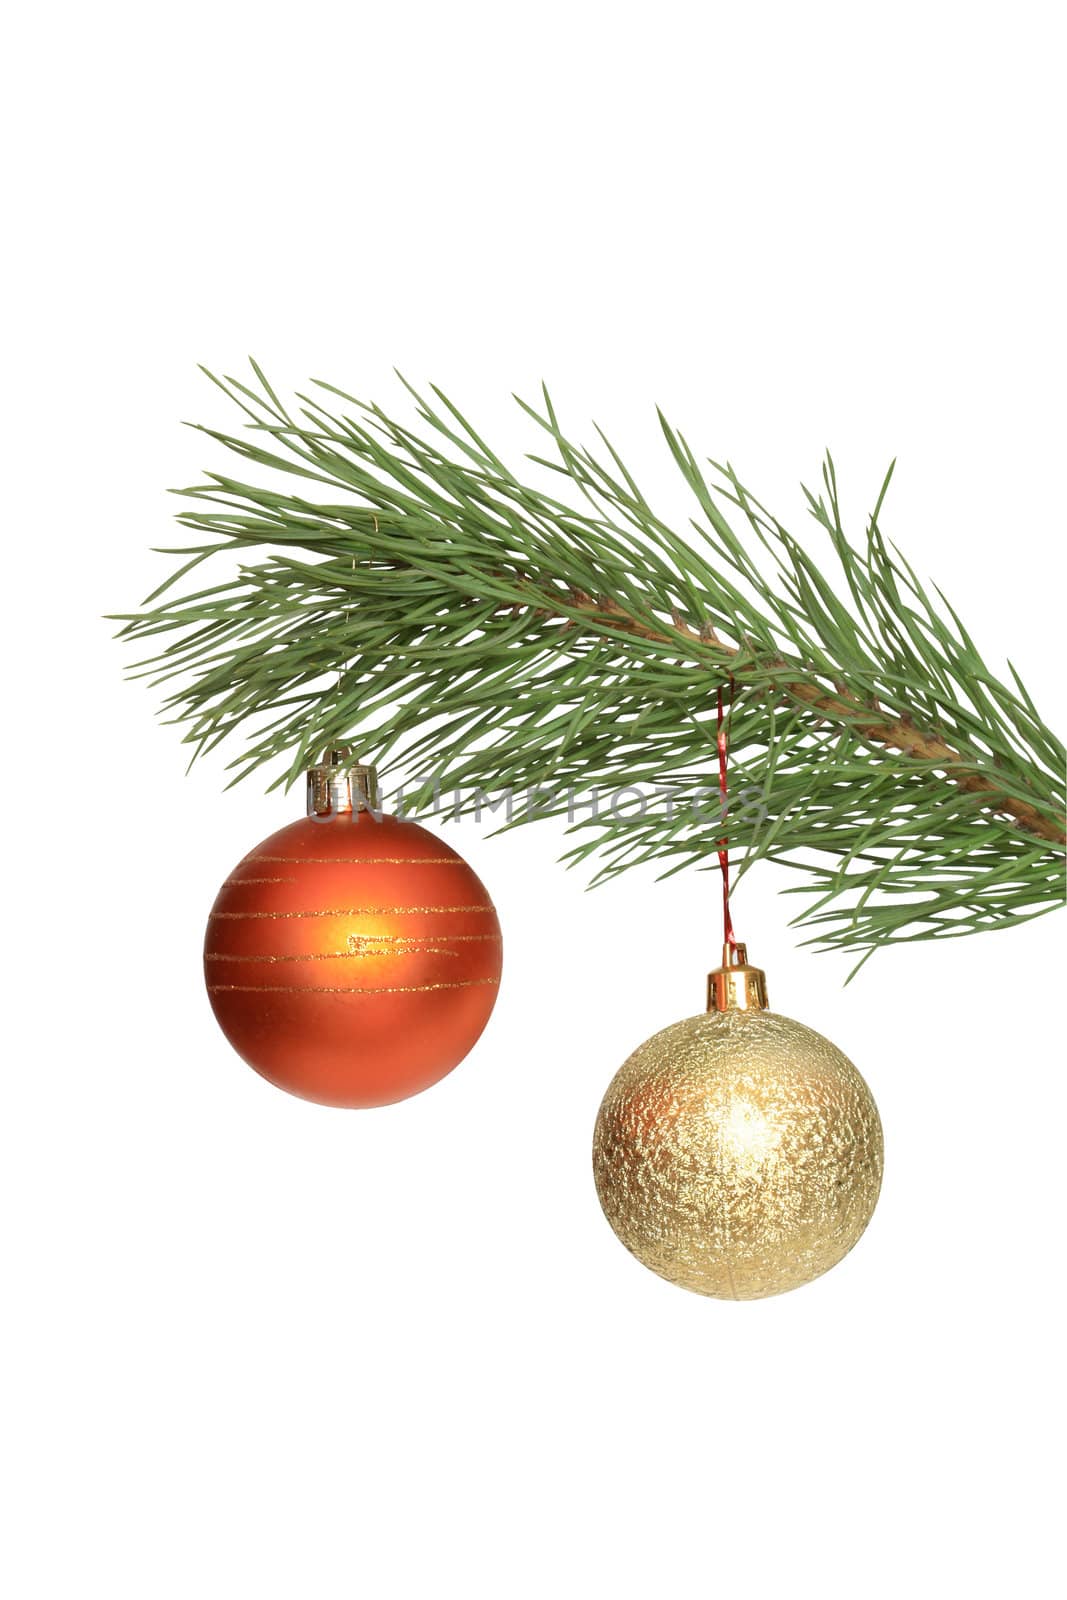 Two Christmas balls hanging on fir tree isolated on white background with clipping path